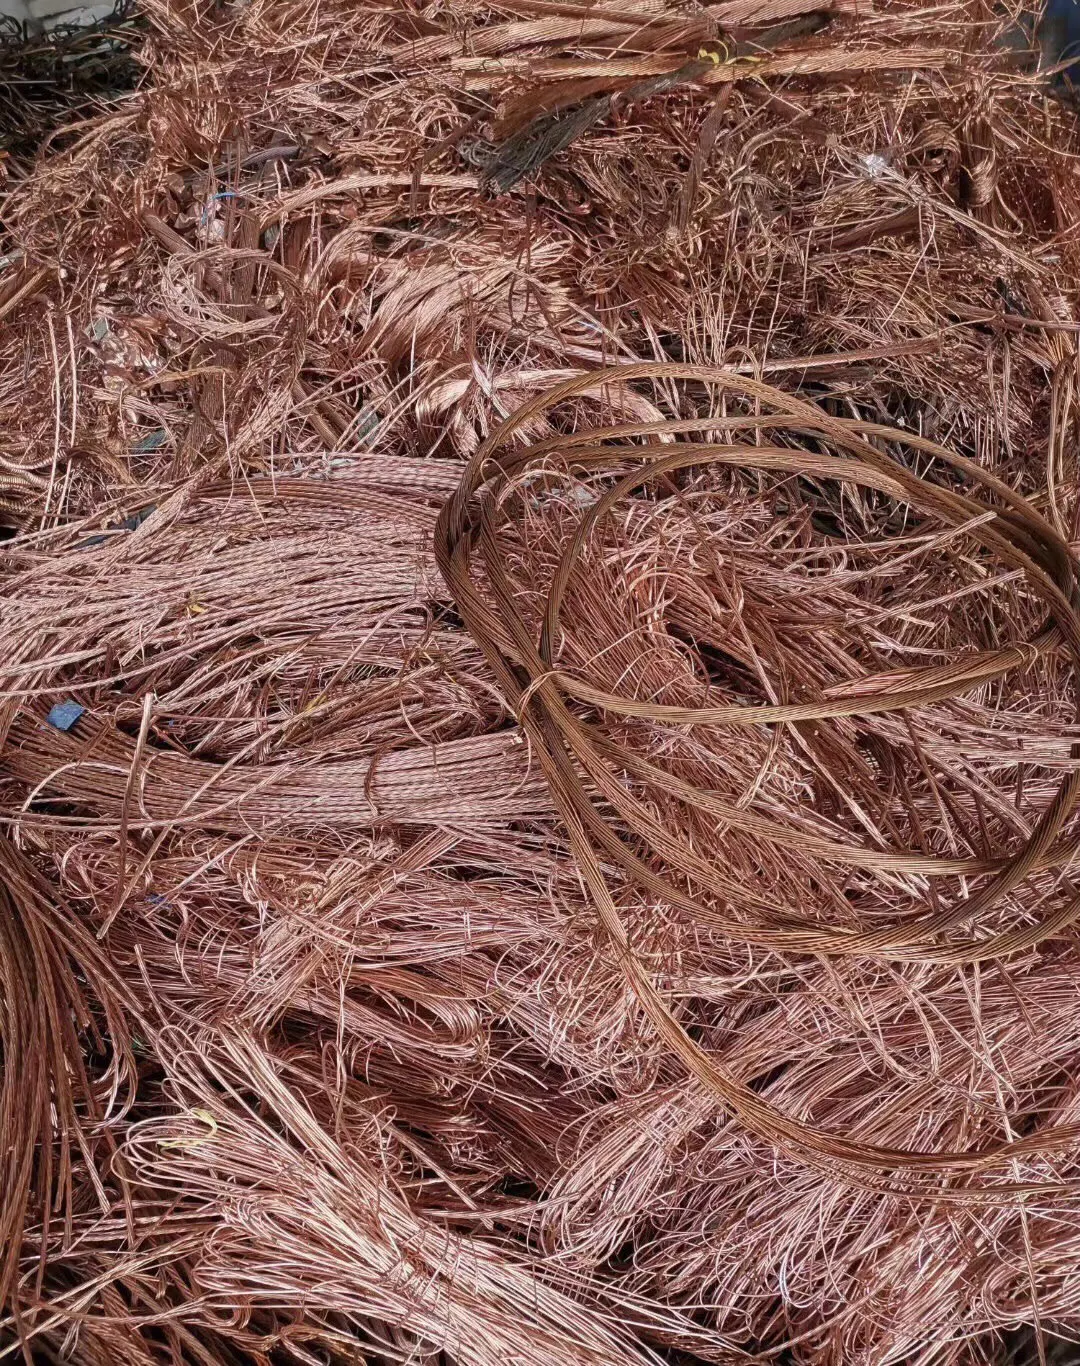 Cheap scrap for Copper wire /rod/ pipe high purity 99.9%